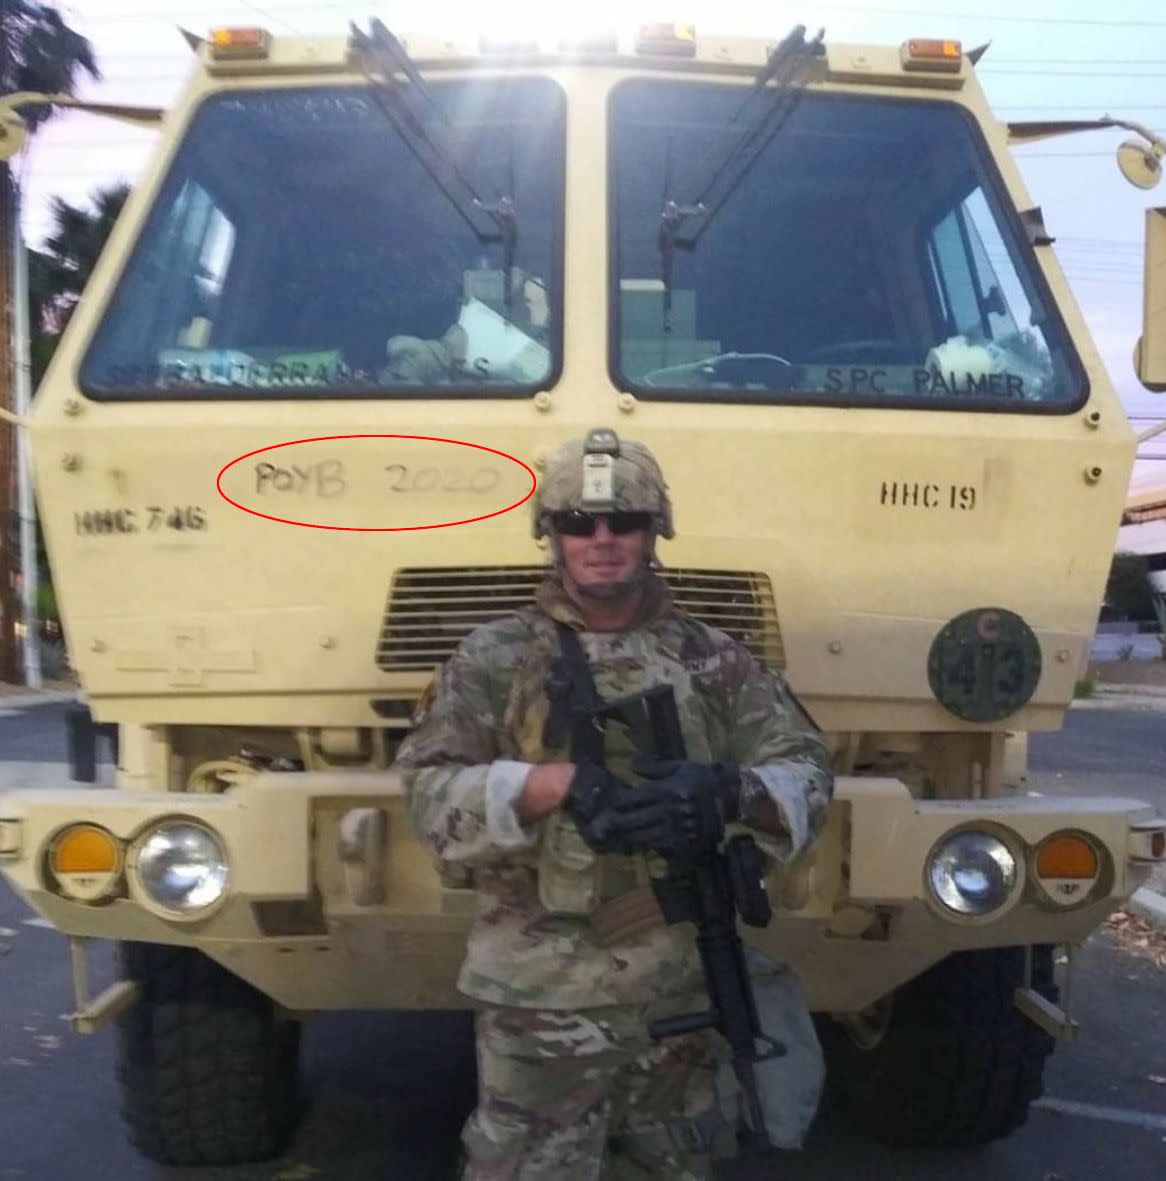 Sgt. Brian Jackson of the California National Guard posted this Facebook photo on June 2 while deployed to police Black Lives Matter protests in Los Angeles. It shows him standing in front of a military vehicle inscribed with a slogan for the Proud Boys, a neo-fascist group. (Photo: Facebook)